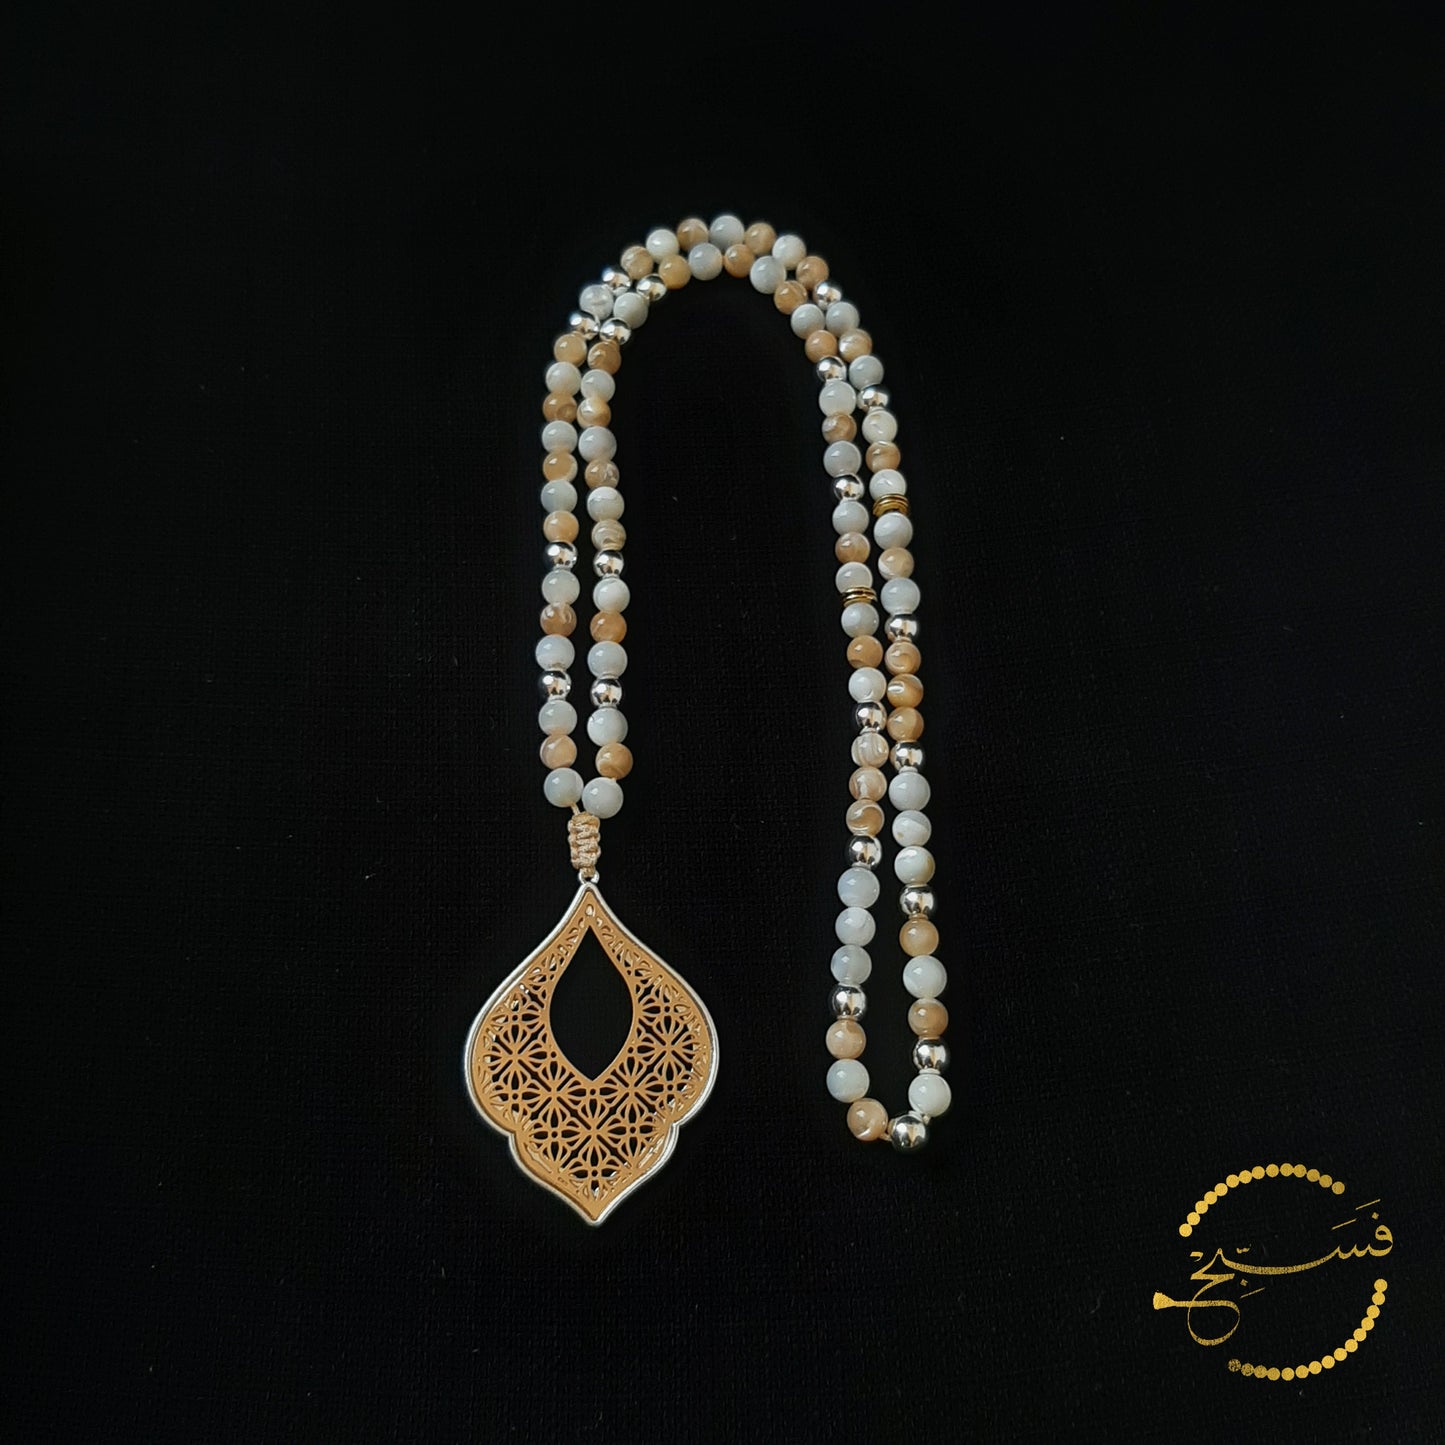 A pendant reminiscent of Islamic design, this tasbih has a gold & silver effect with the use of natural trochus shell and hematite beads.  Packaged in a luxurious pouch and a gift box.  99 beads.